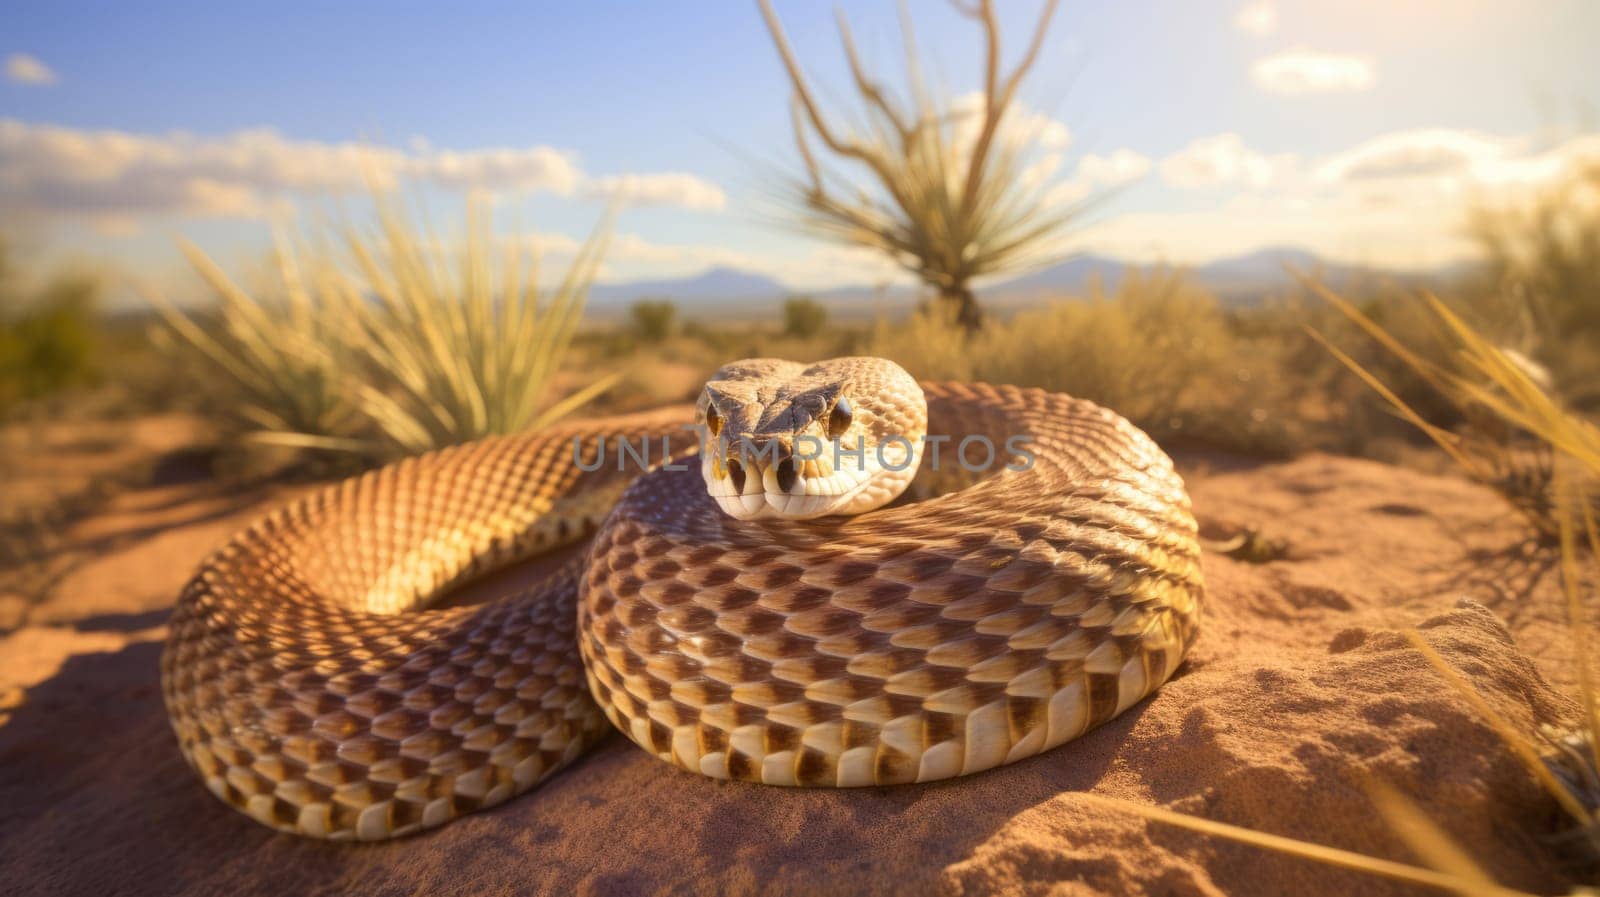 Close-up detail of the head of a Rattlesnake in desert on blurred background by natali_brill